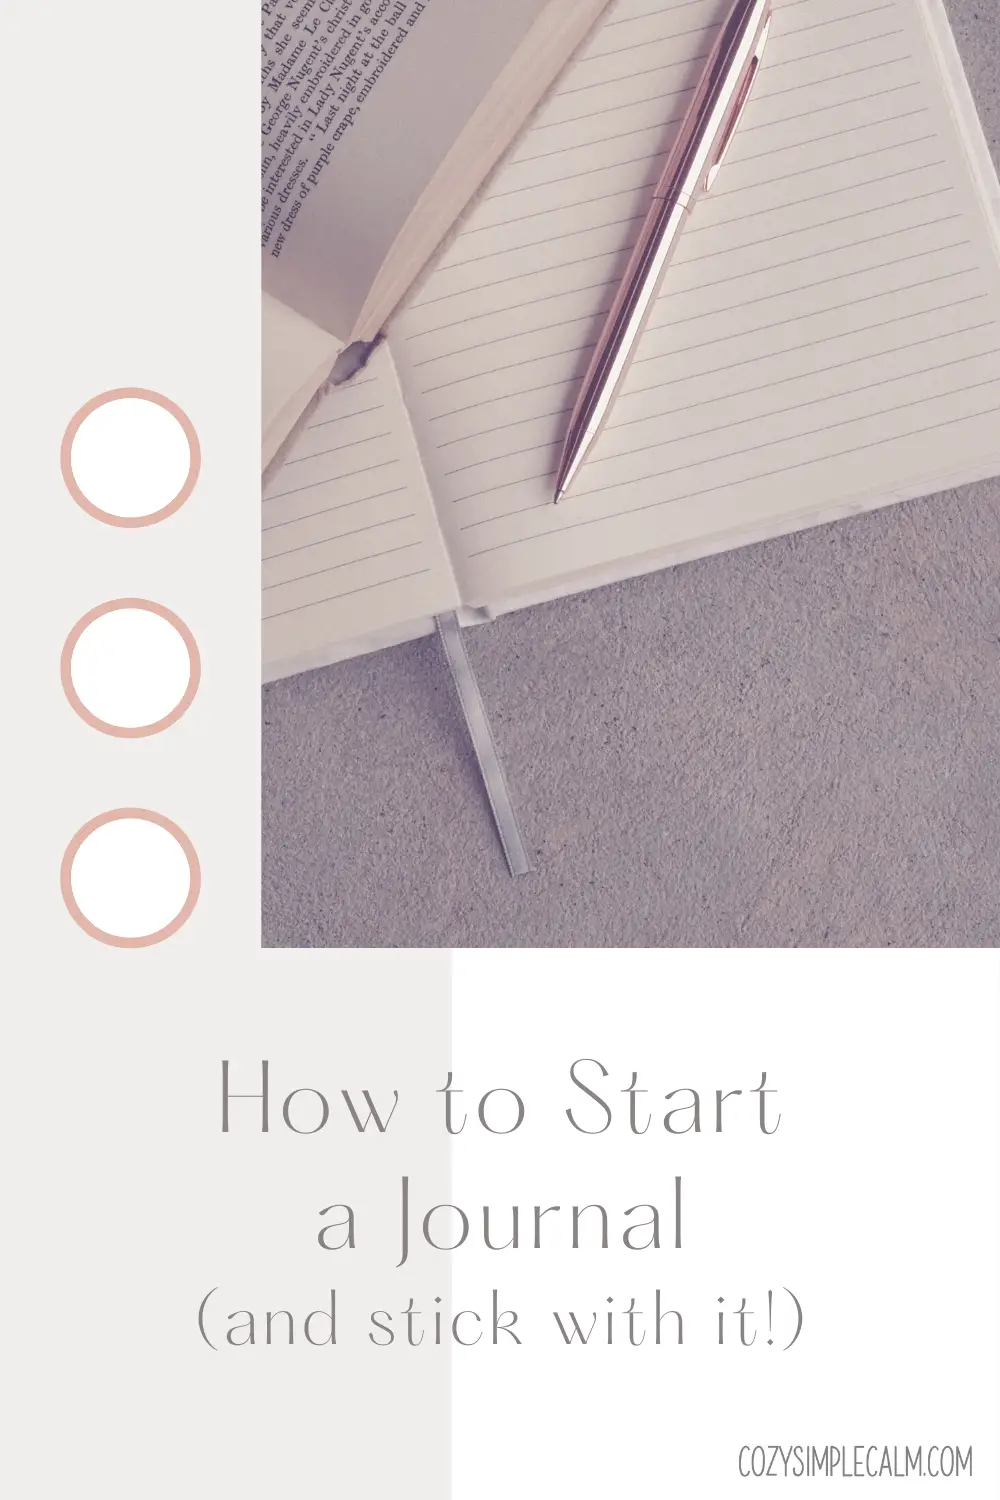 Image of pin laying on lined notebook - Text overlay: How to start a journal (and stick with it!)